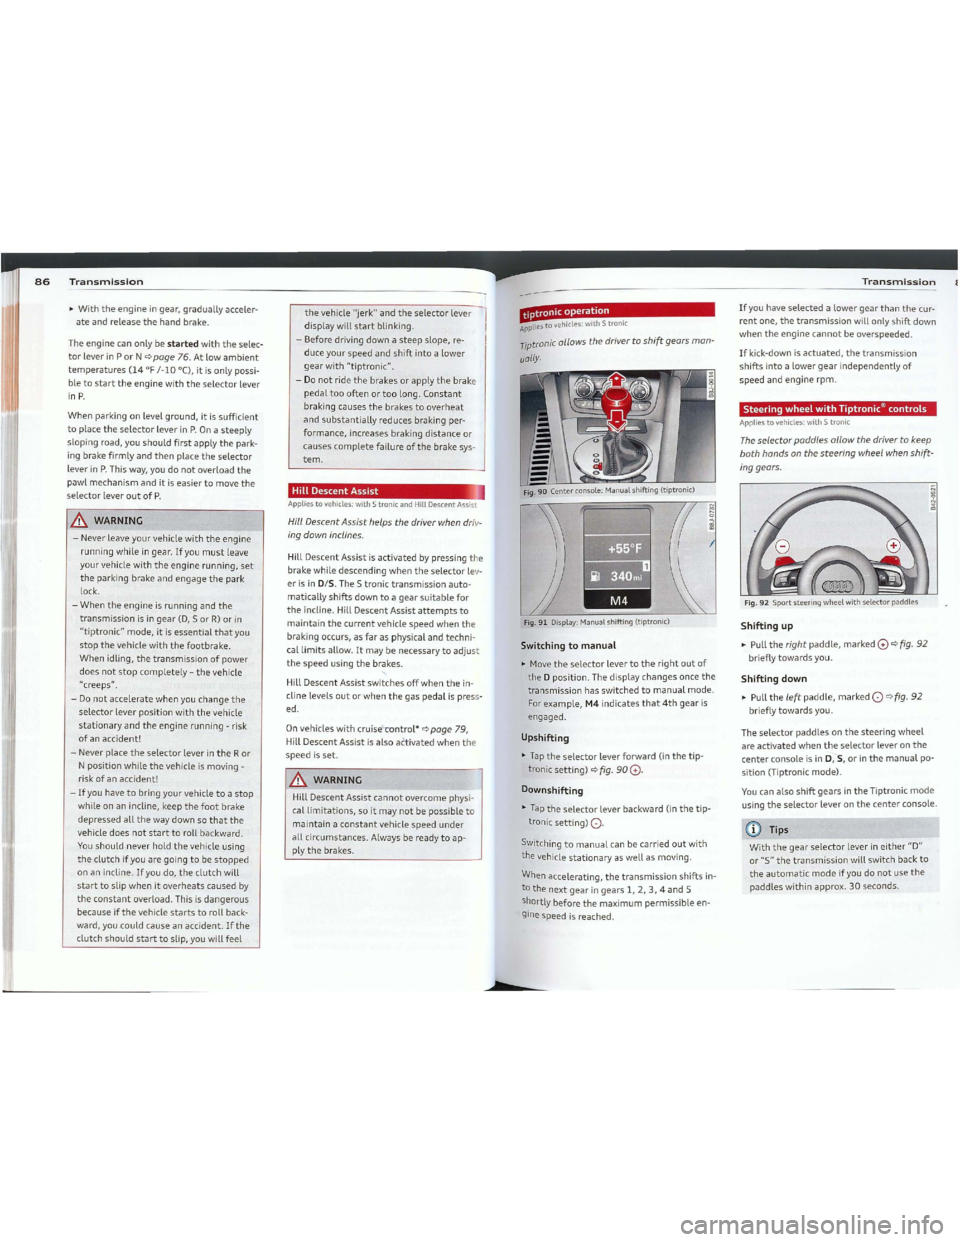 AUDI TT 2012 Service Manual Downloaded from www.Manualslib.com manuals search engine Fig.91Display:Manualshifting (tiptronicl
((DTips
Withthegearselectorleverineither"0"
or"5"thetransmissionwiLLswitchbackto
theautomaticmodeifyou